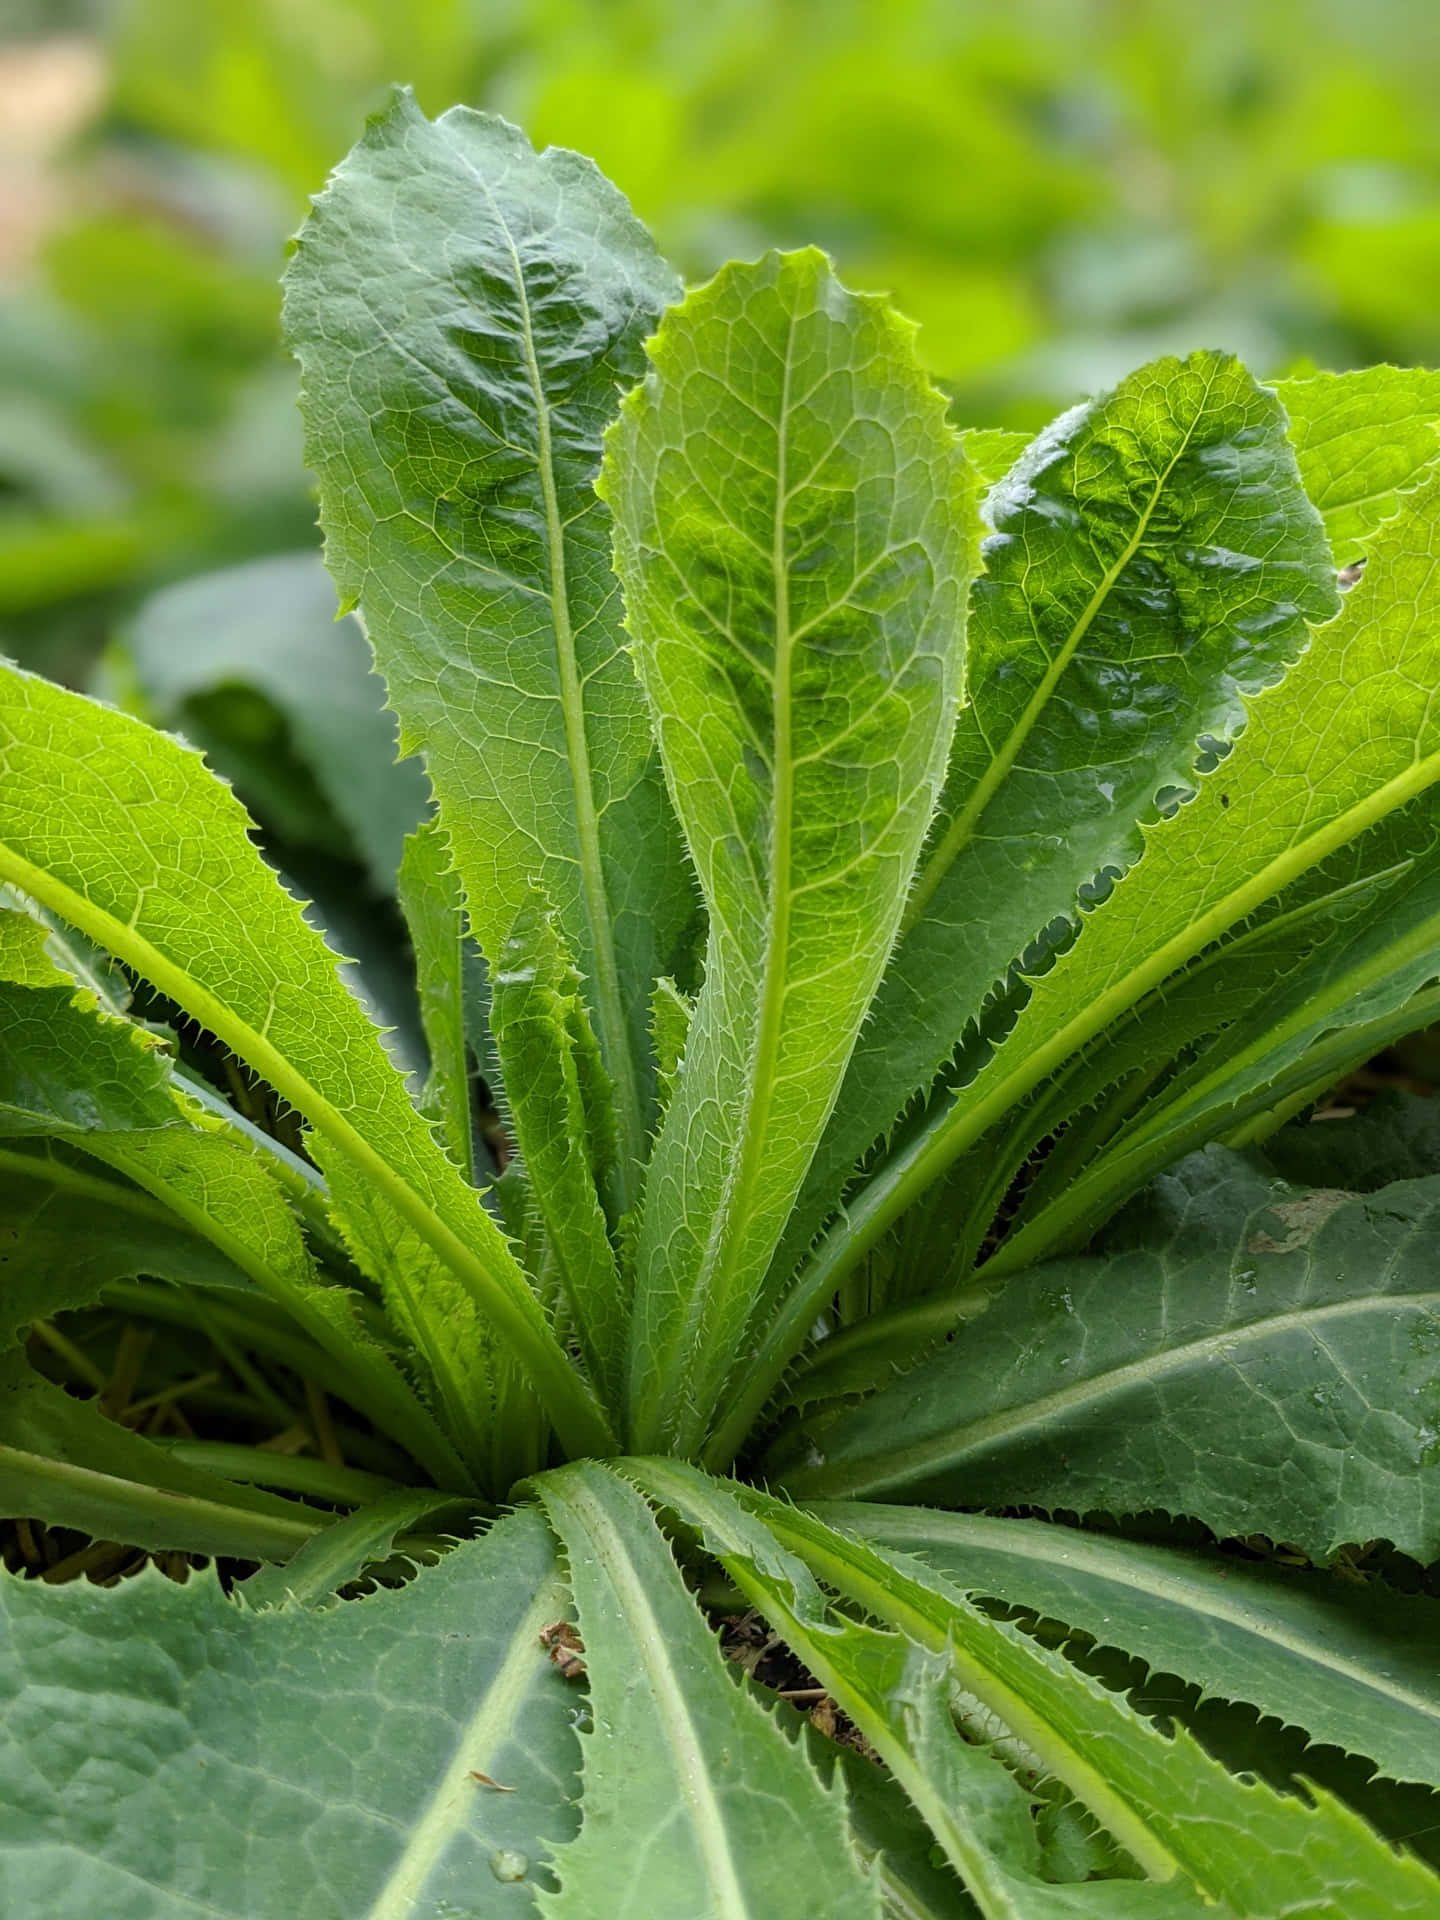 A Close Up Of A Leafy Green Plant